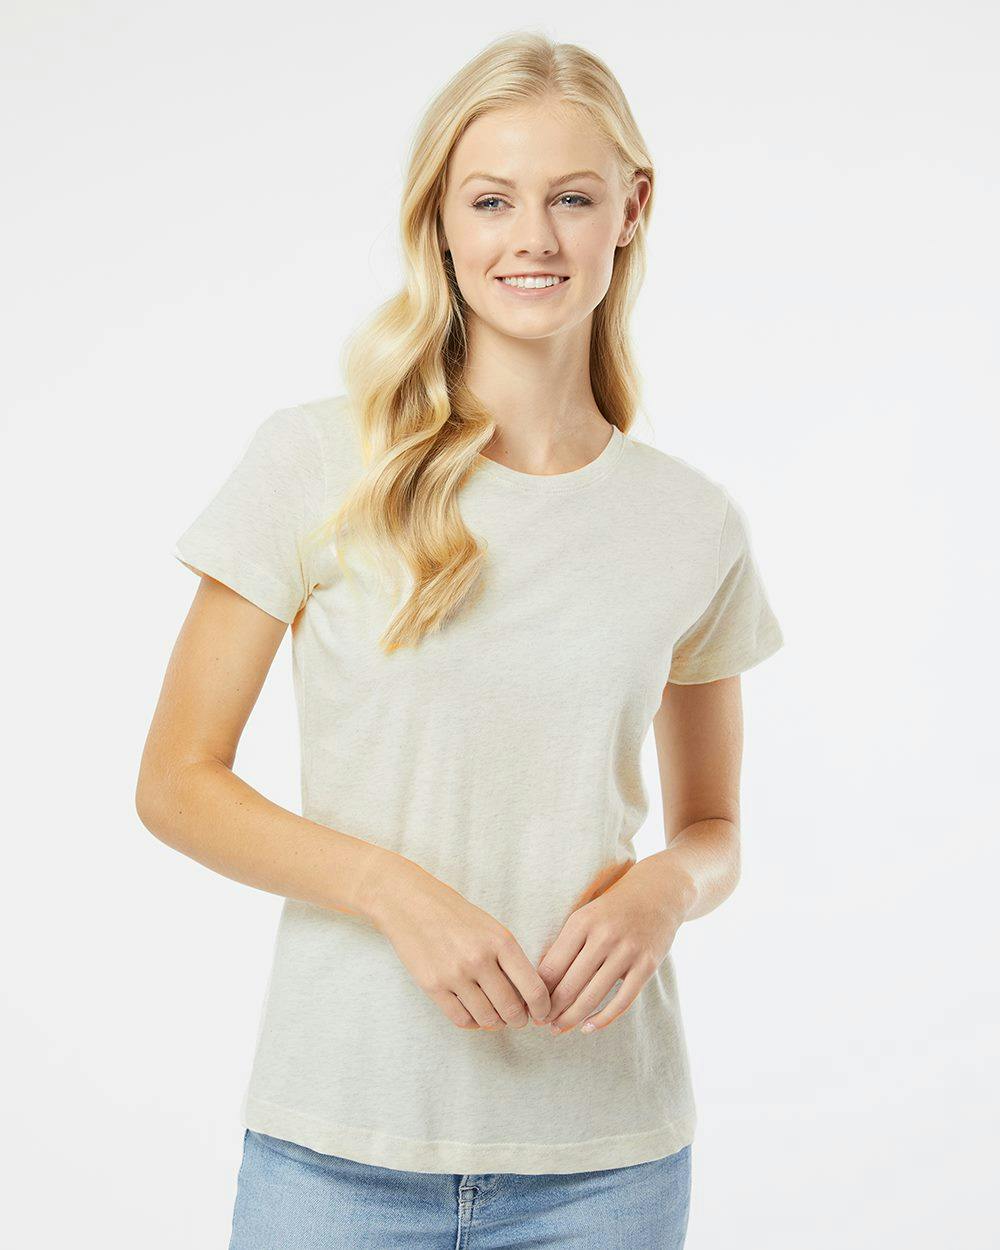 Image for Women's Fine Jersey Tee - 3516